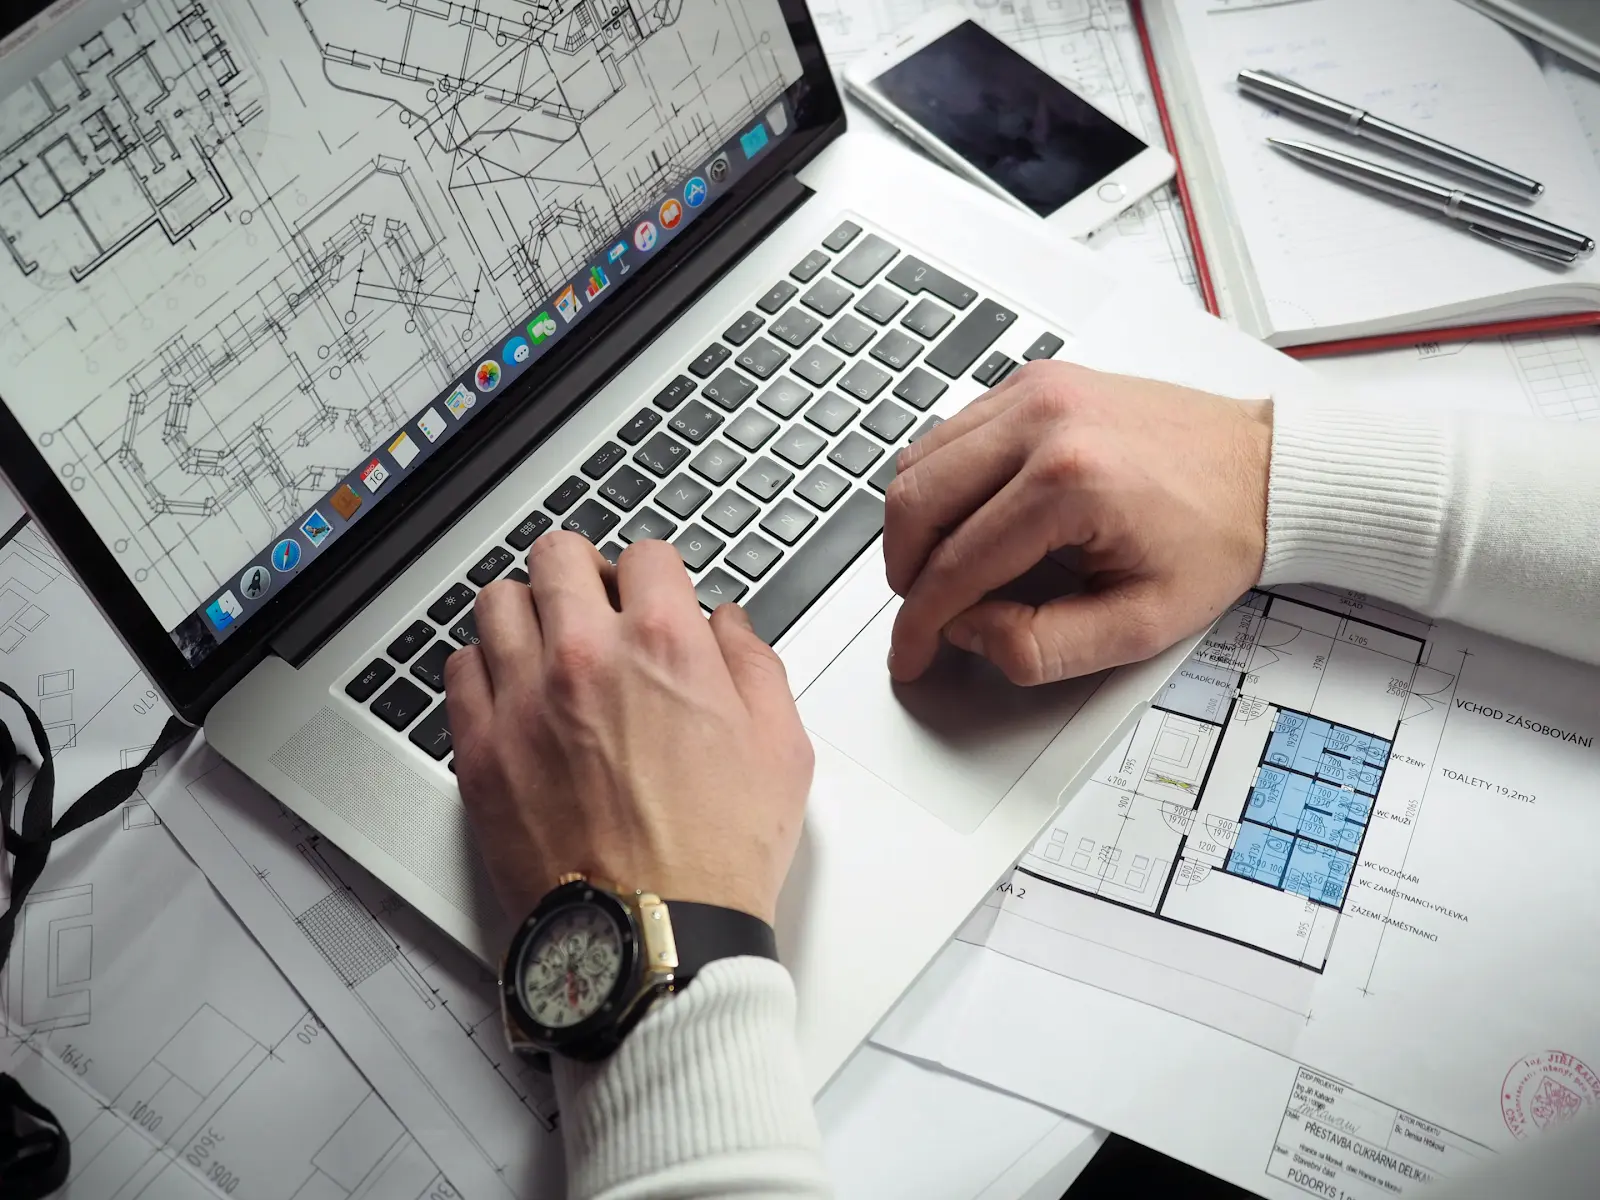 virtual construction assistants, outsource, software development, improve lead generation, help companies to create a process for their contractors, create a task when there is a new development project, service for companies will vary based on location and project